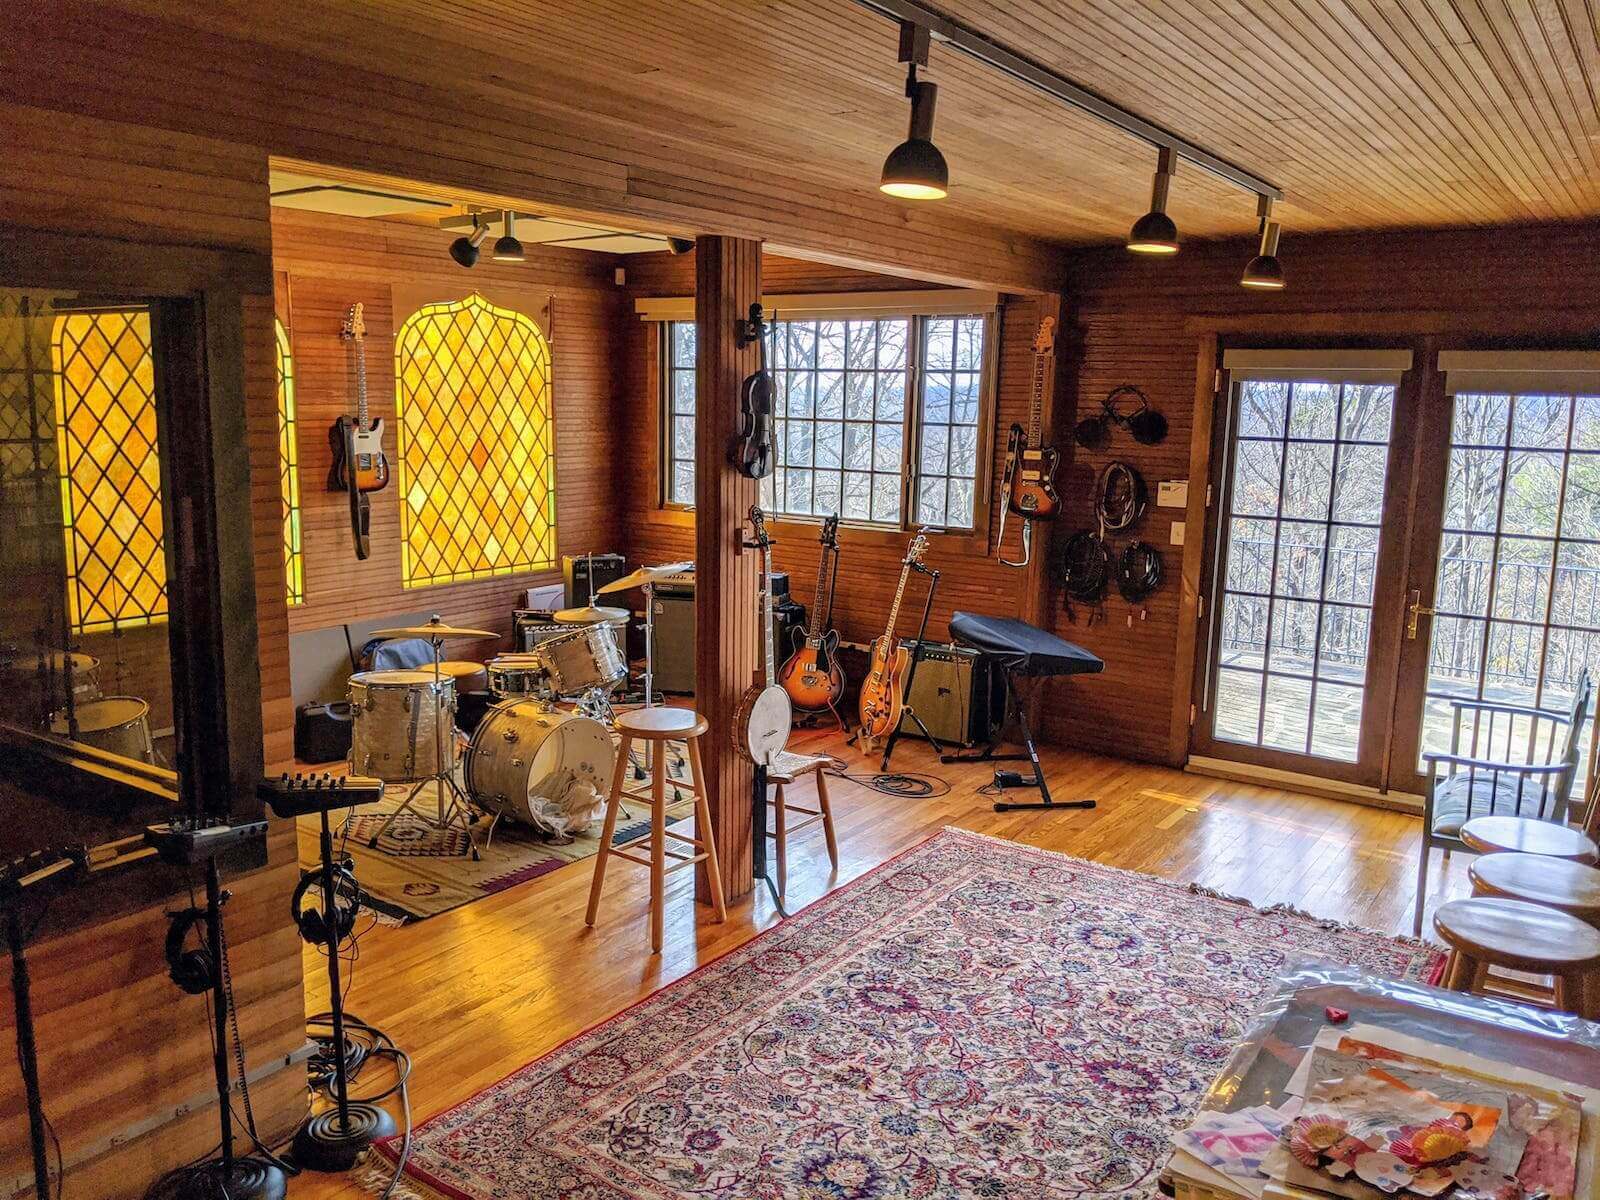 The live recording room